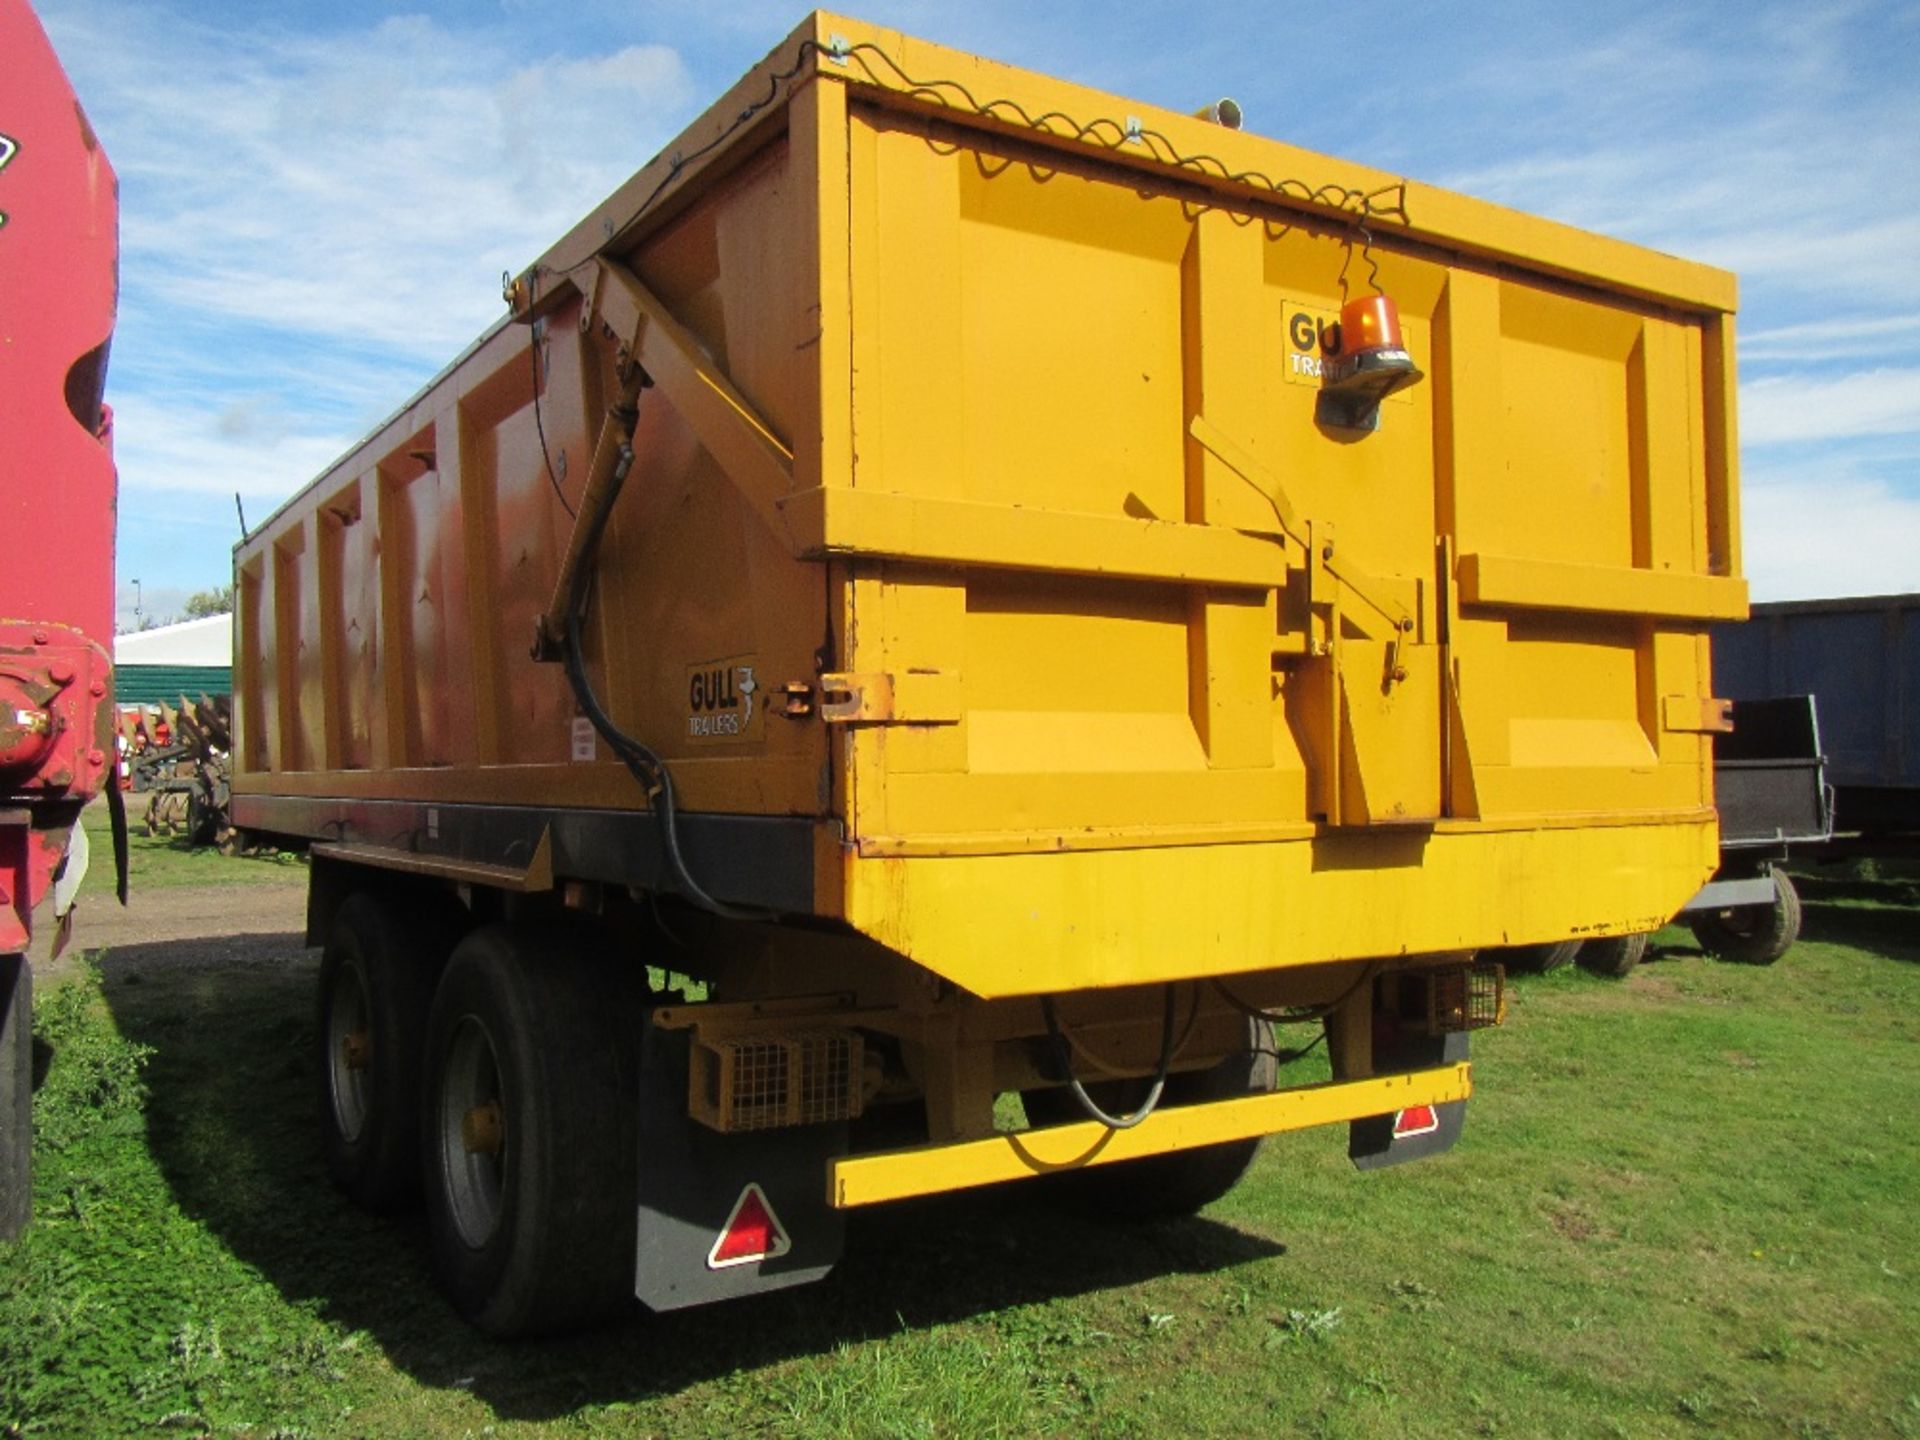 Wootton/Gull 14 Ton Trailer with Commercial Axles, Air & Hyd Brakes, Sprung Drawbar, Hydraulic - Image 3 of 4